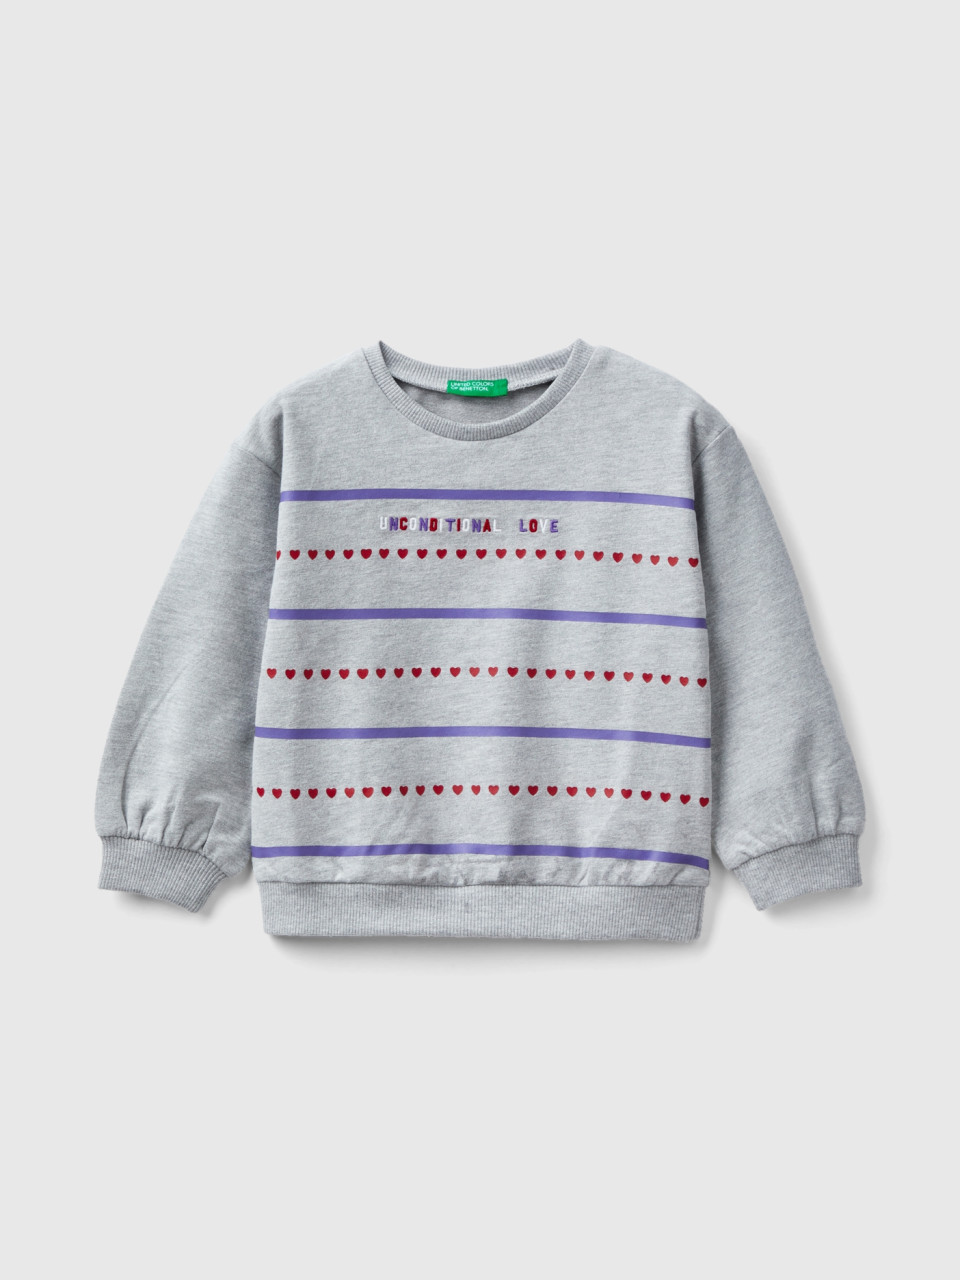 Benetton, Sweatshirt With Print And Embroidery, Light Gray, Kids